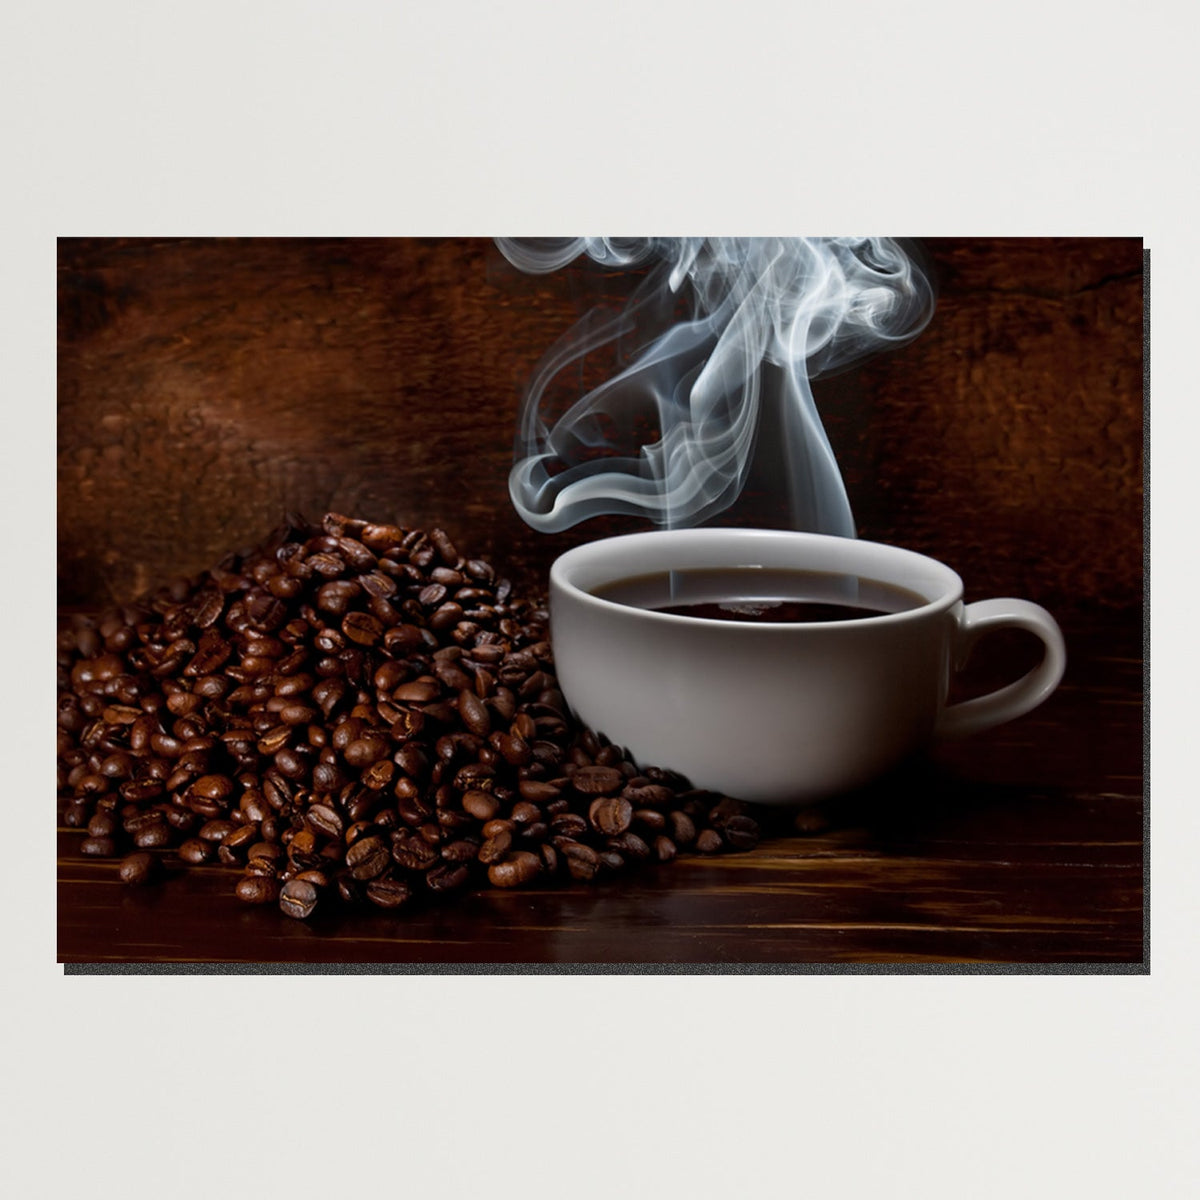 https://cdn.shopify.com/s/files/1/0387/9986/8044/products/AromaofCoffeeCanvasArtprintStretched-Plain.jpg